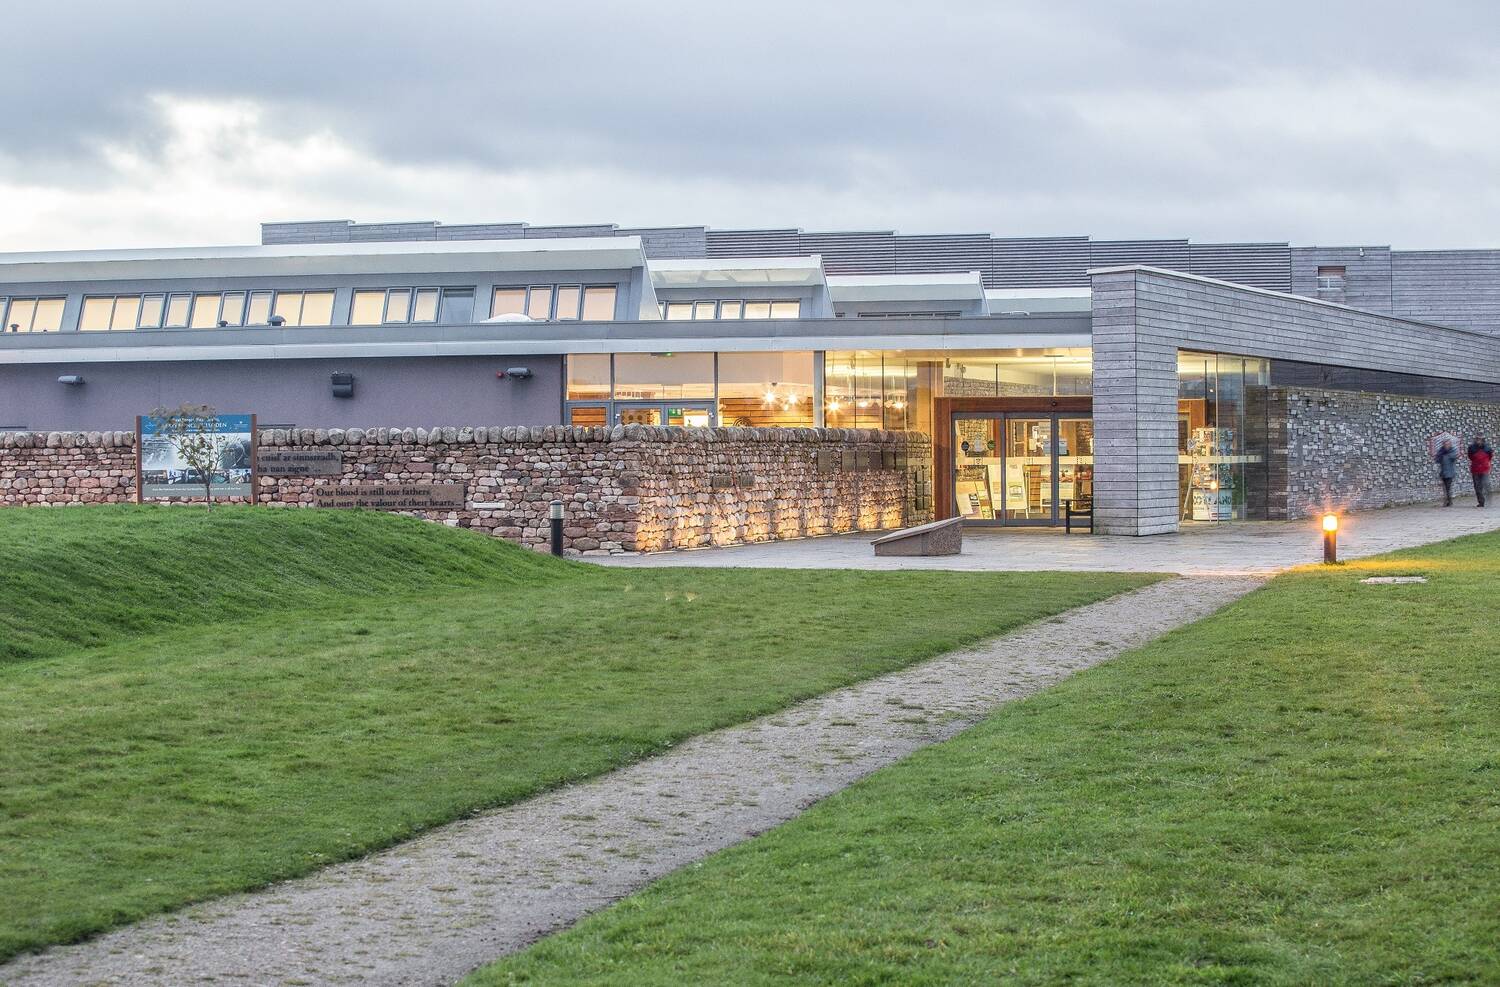 A view of Culloden visitor centre, looking towards the entrance from a path leading across a grassy area. The centre is lit inside with a welcoming orange glow.